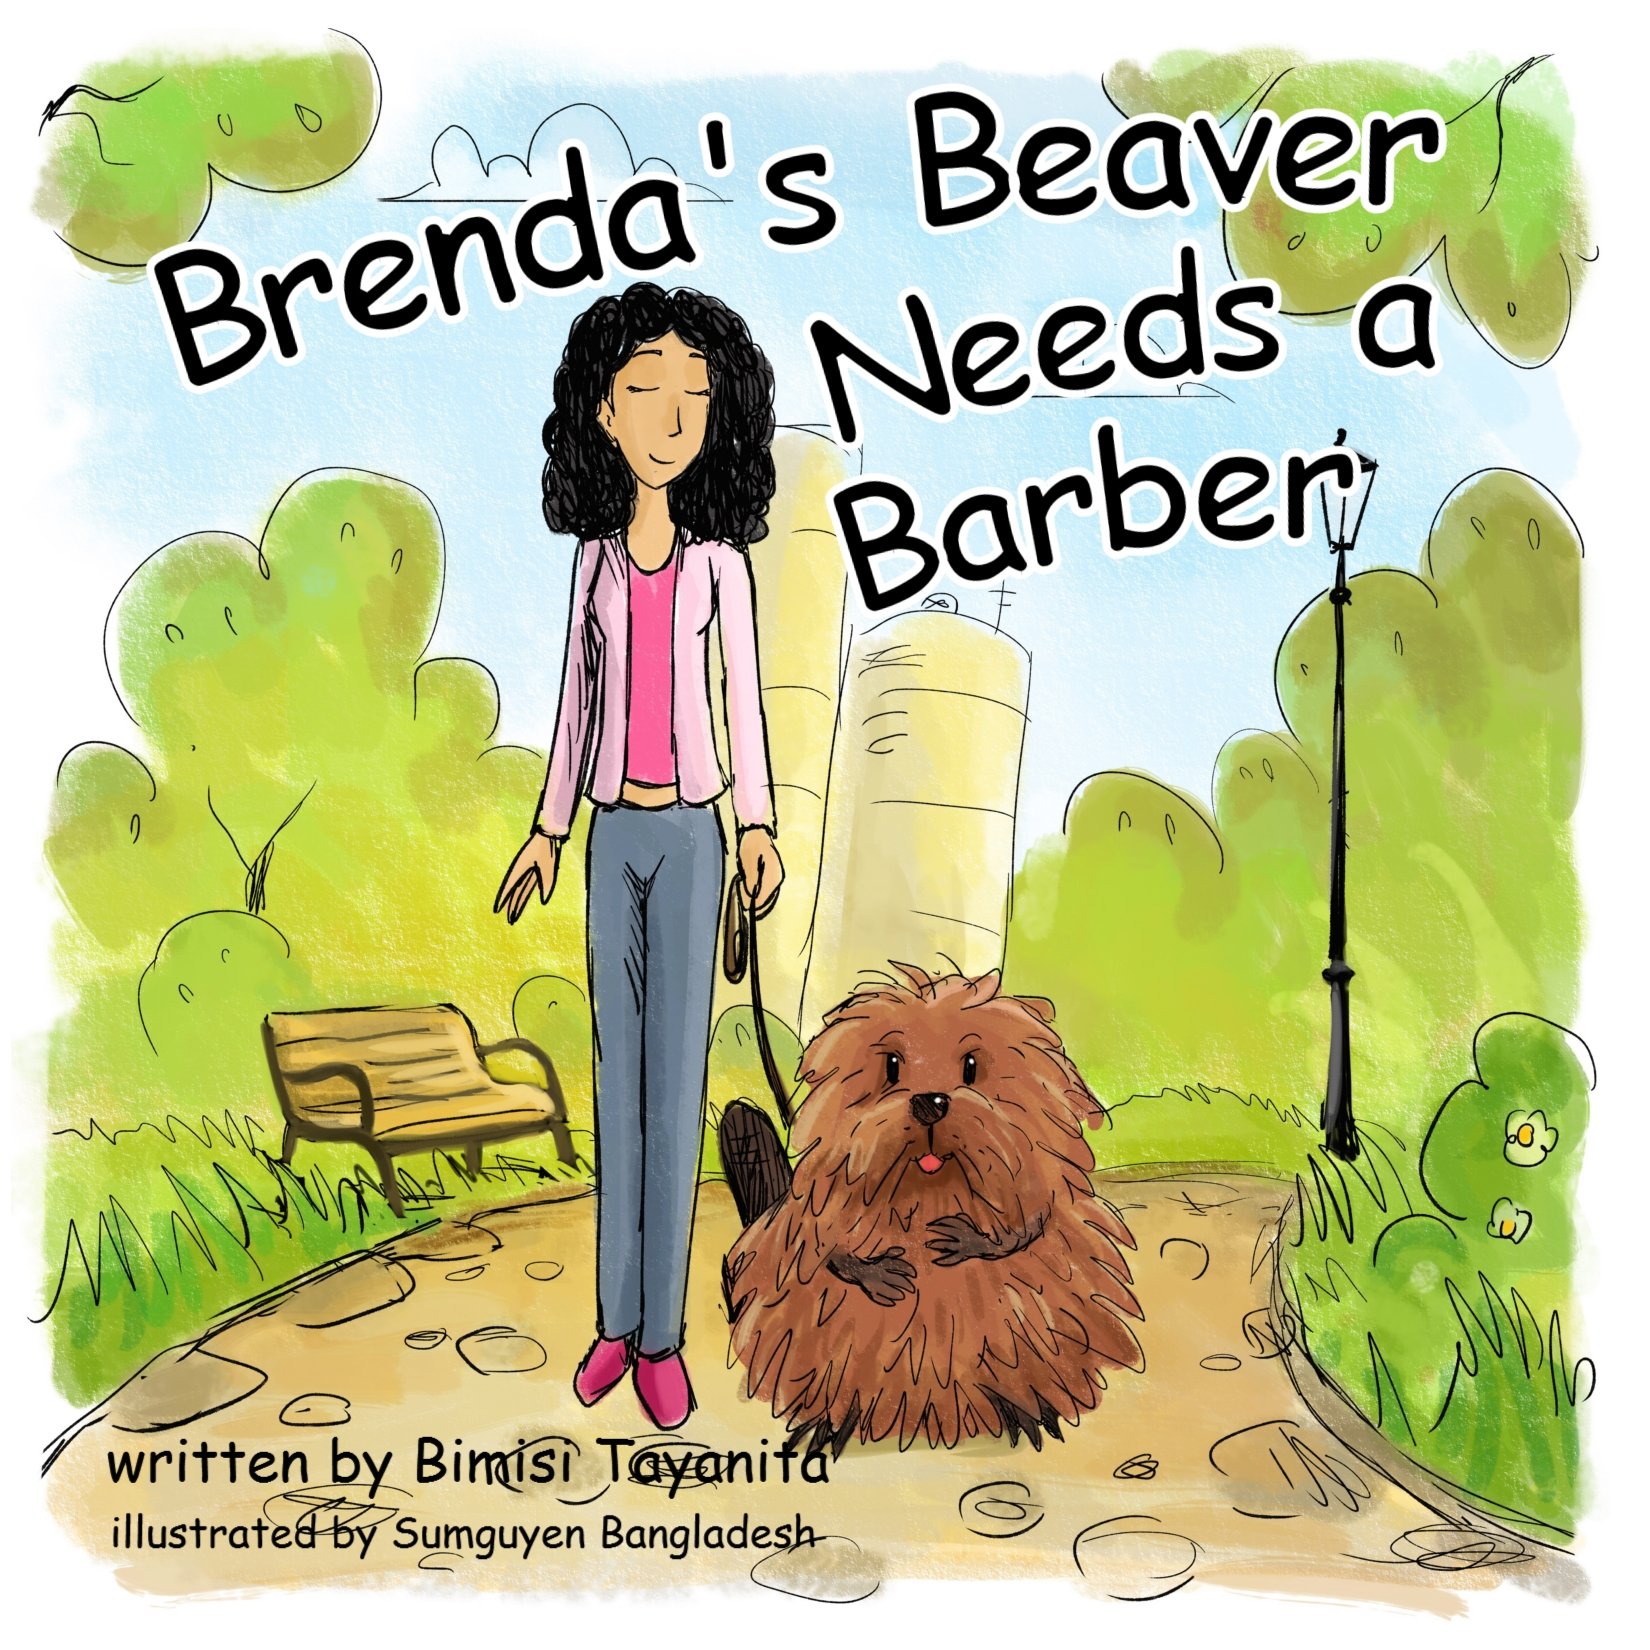 brenda's beaver needs a barber book cover with woman holding leash on a beaver